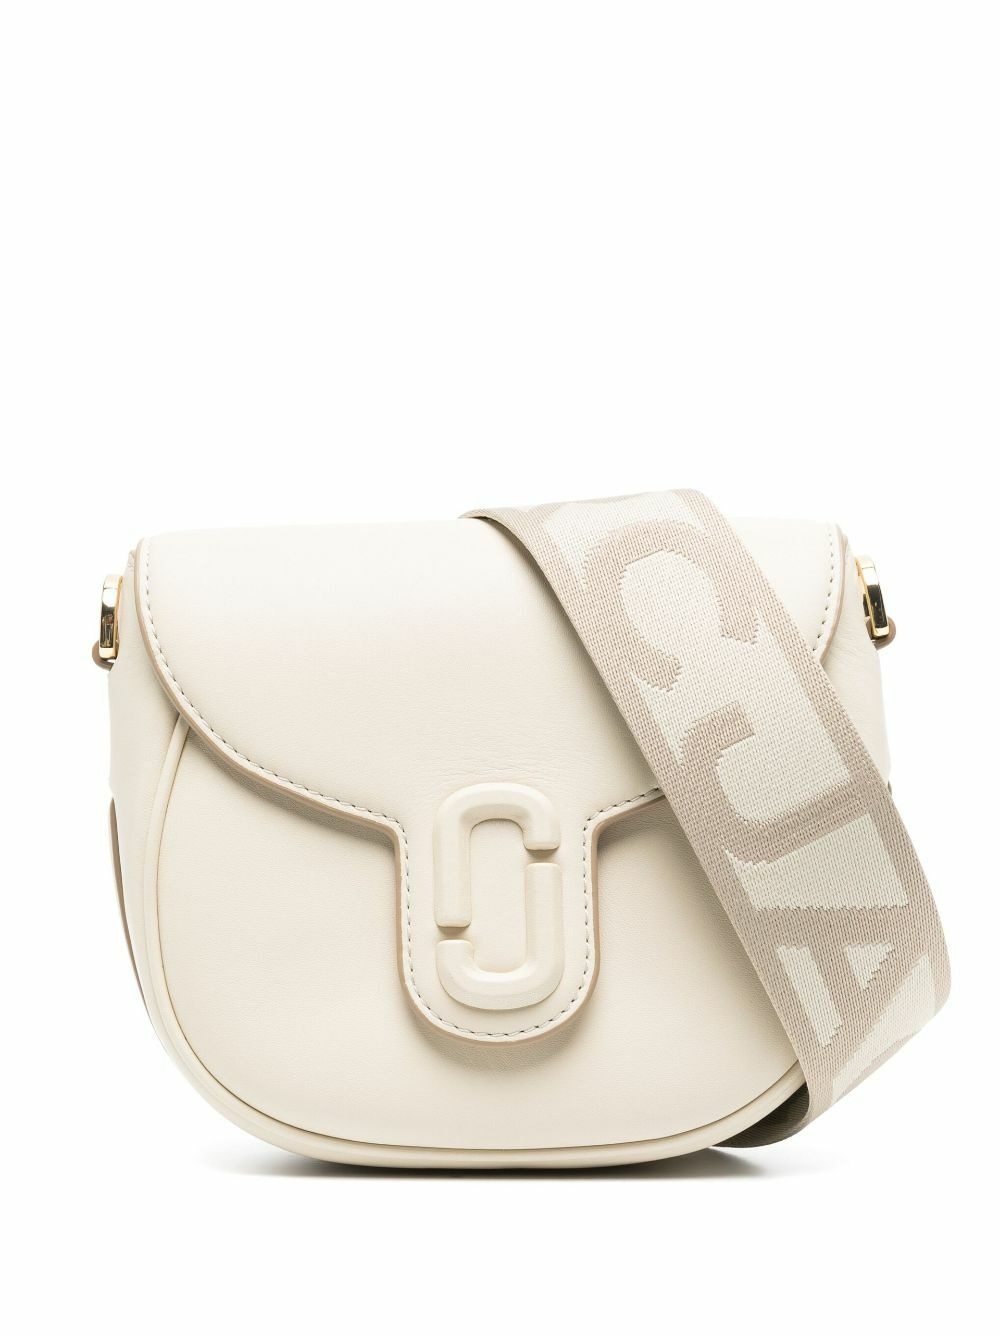 Marc Jacobs for Women FW23 Collection  Marc jacobs snapshot bag, Marc  jacobs crossbody bag, Marc jacobs bag